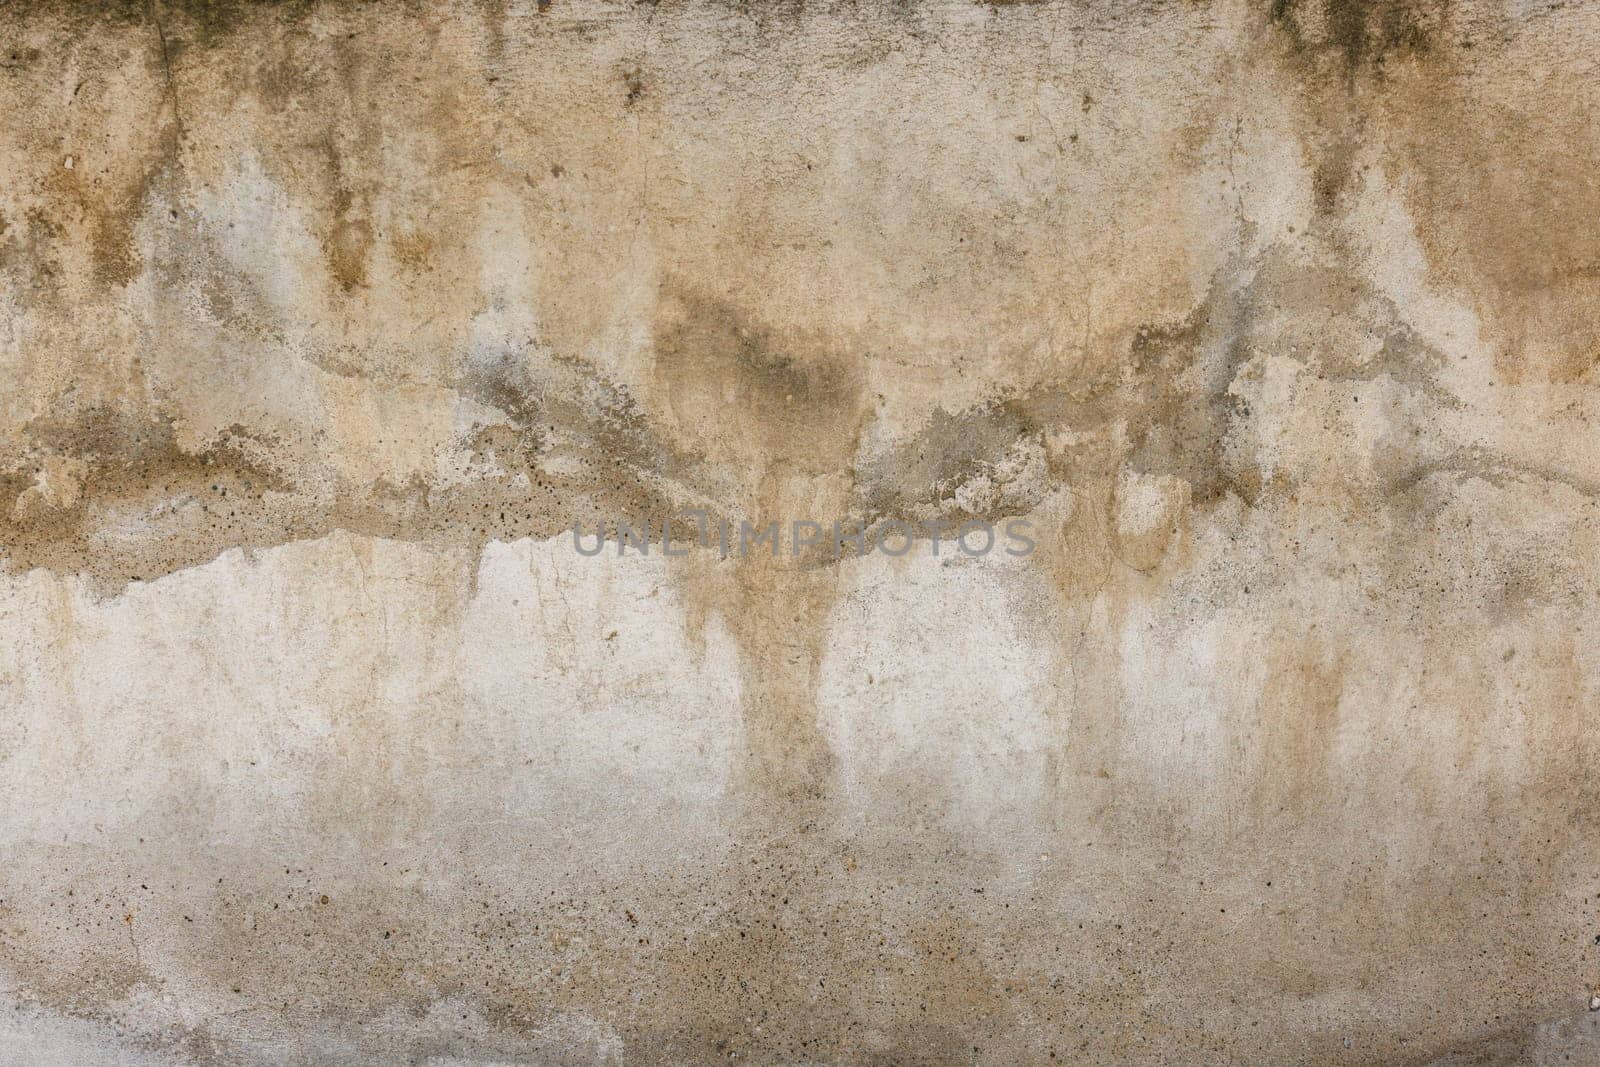 Old water damaged grey plaster wall surface with yellow smudges. Full-frame flat background and texture.